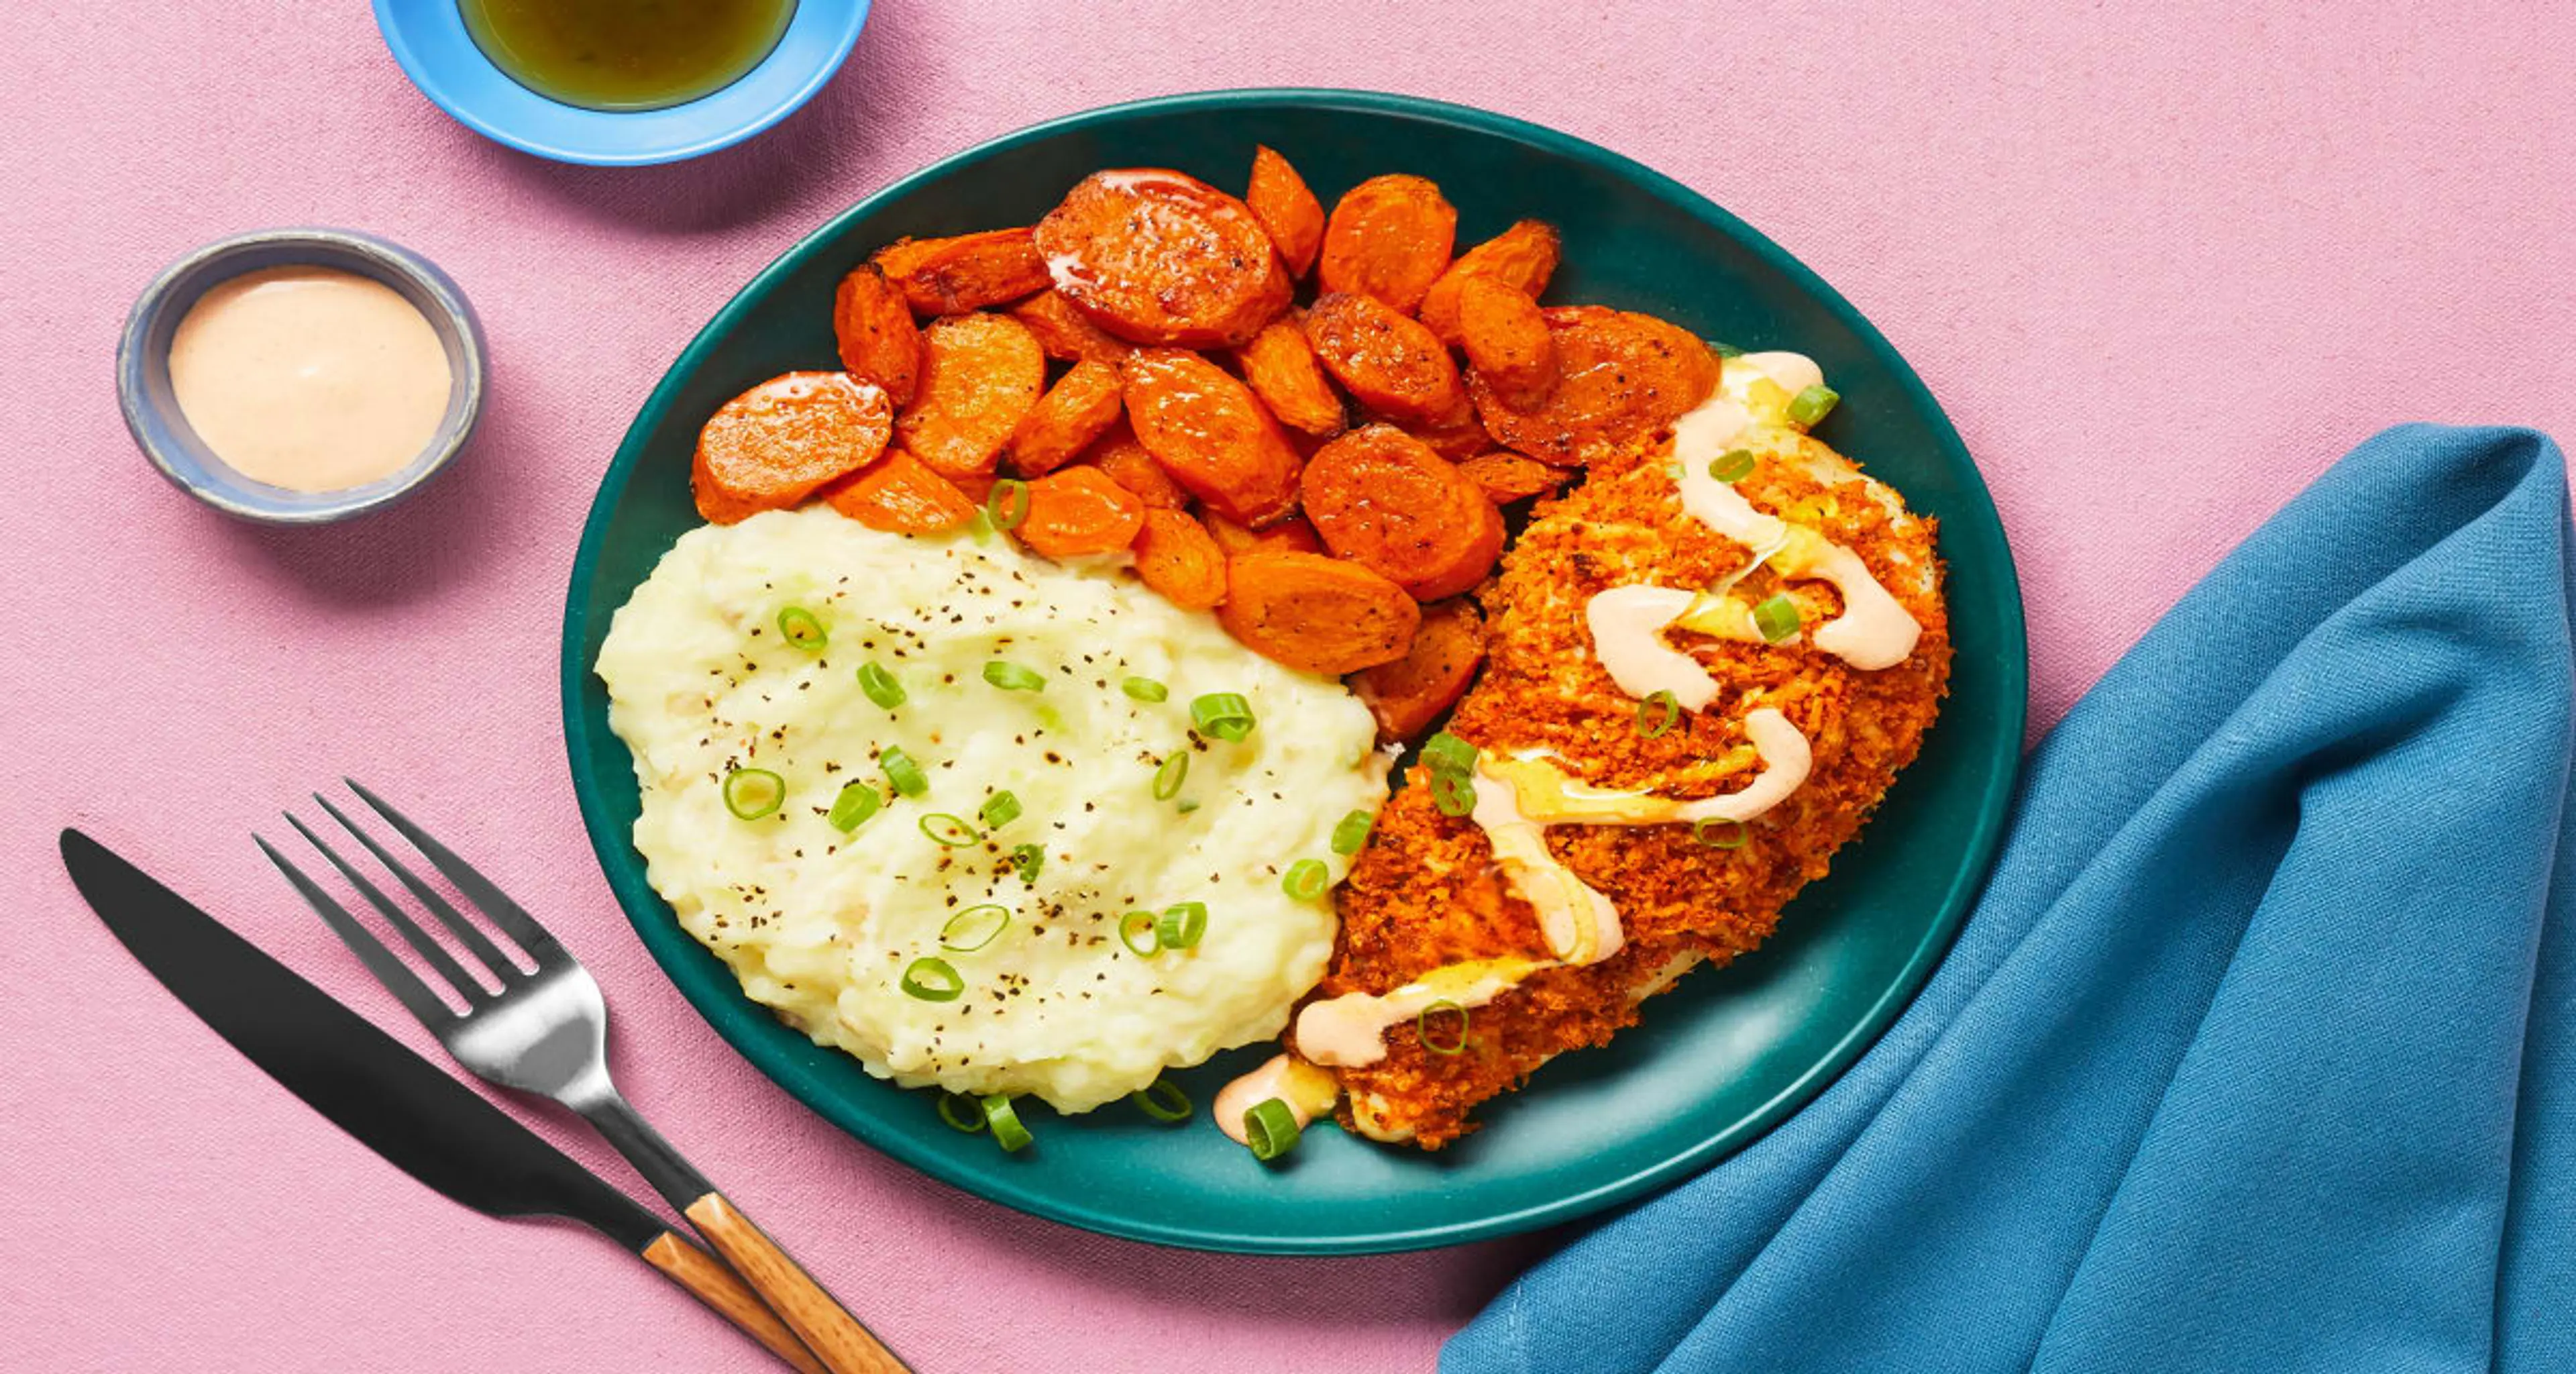 Crispy Kickin’ Cayenne Chicken Cutlets with Mashed Potatoes,